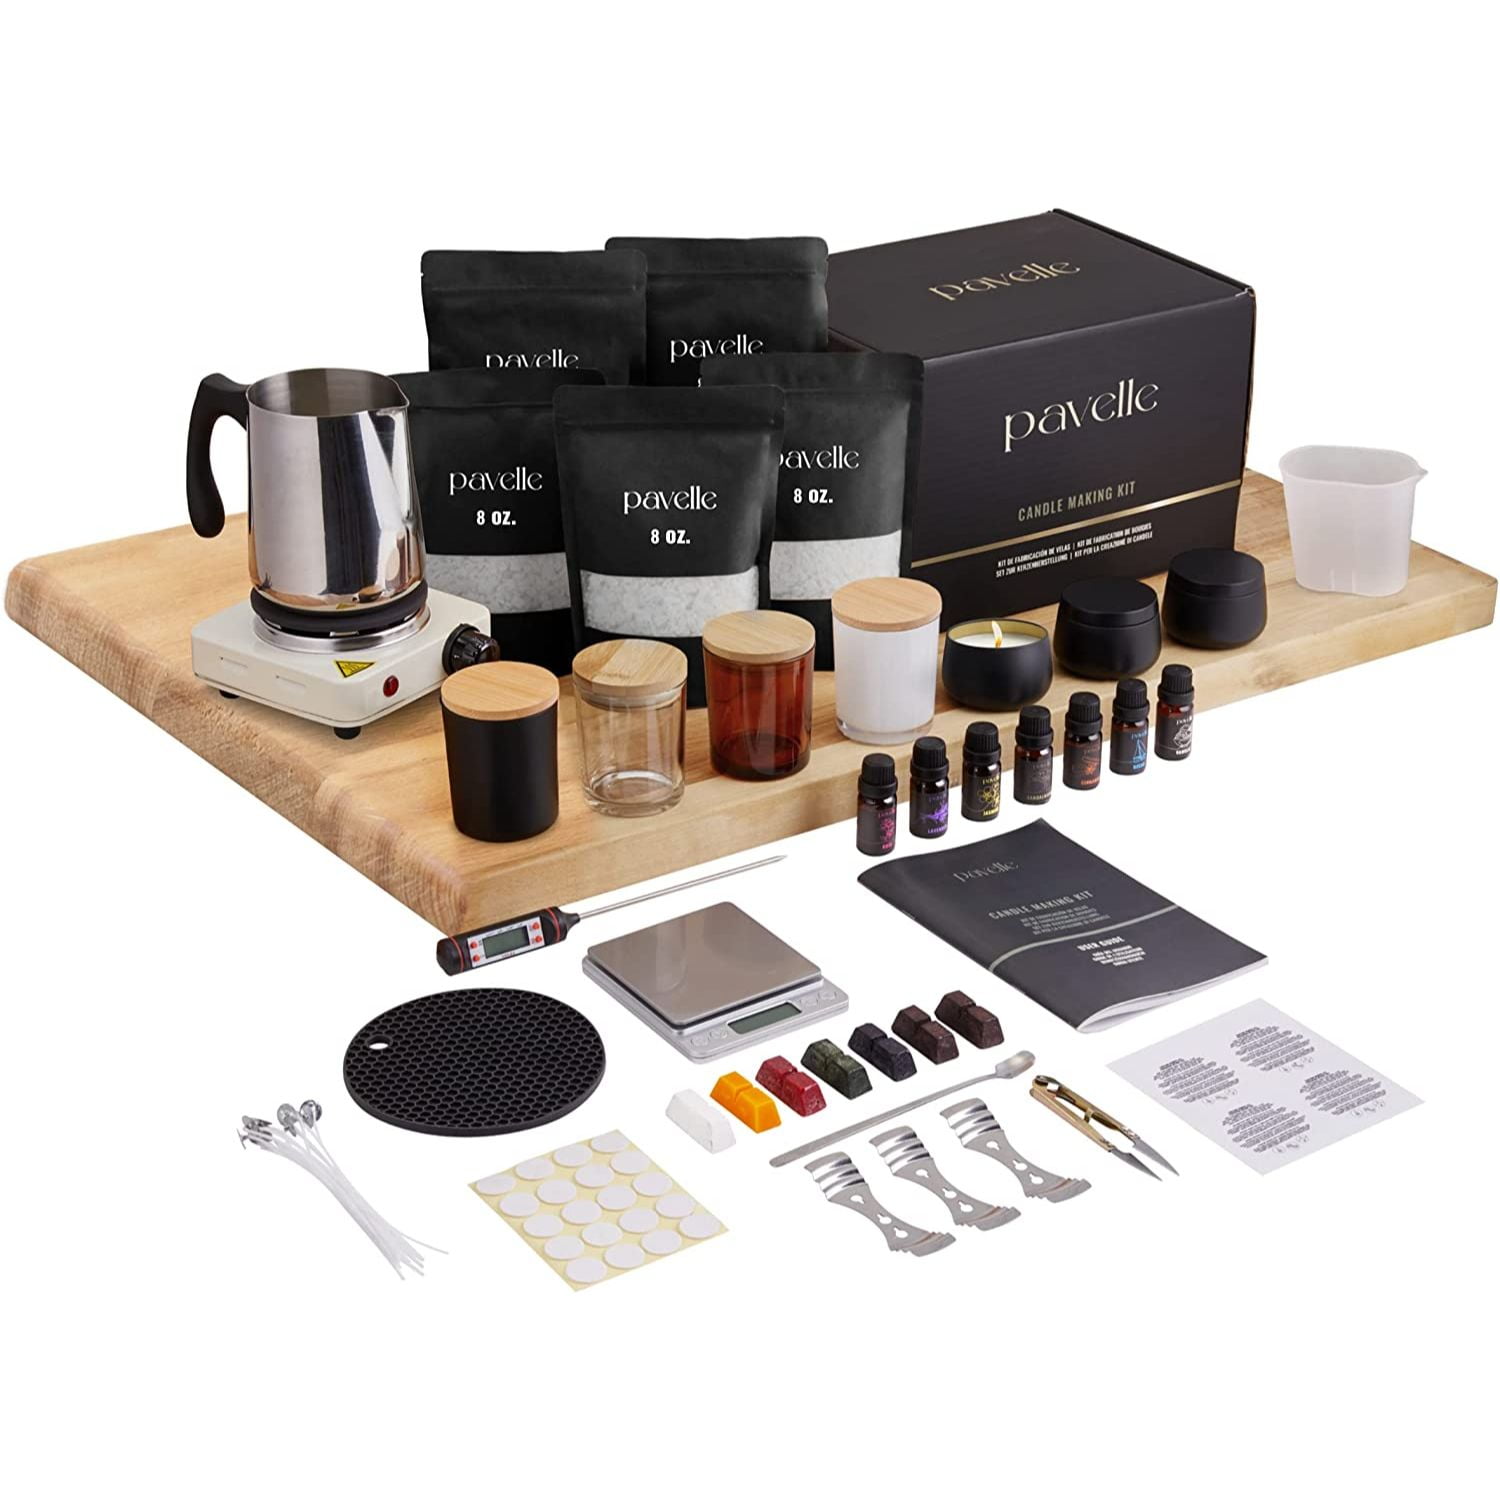 ETUOLIFE Candle Making Kit for Adults, Candle Making Supplies, Soy Wax Candle Making Kit for Making Soy Candle,Soy Wax for Candle Making,Candle Soy